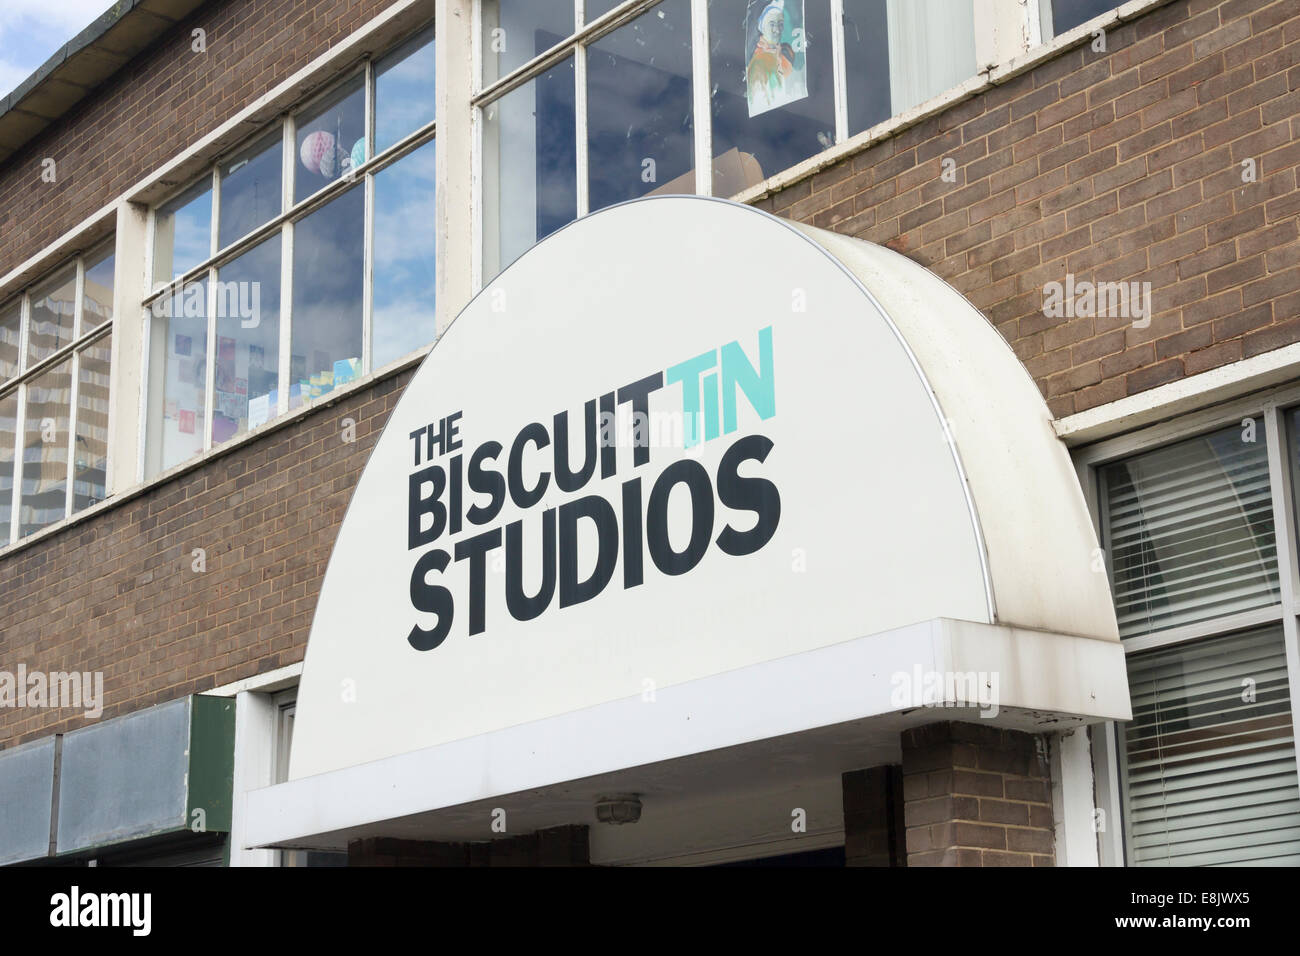 The Biscuit Tin Studios in Newcastle is a 40 studio complex, sister to the Biscuit Works contemporary art gallery. Stock Photo